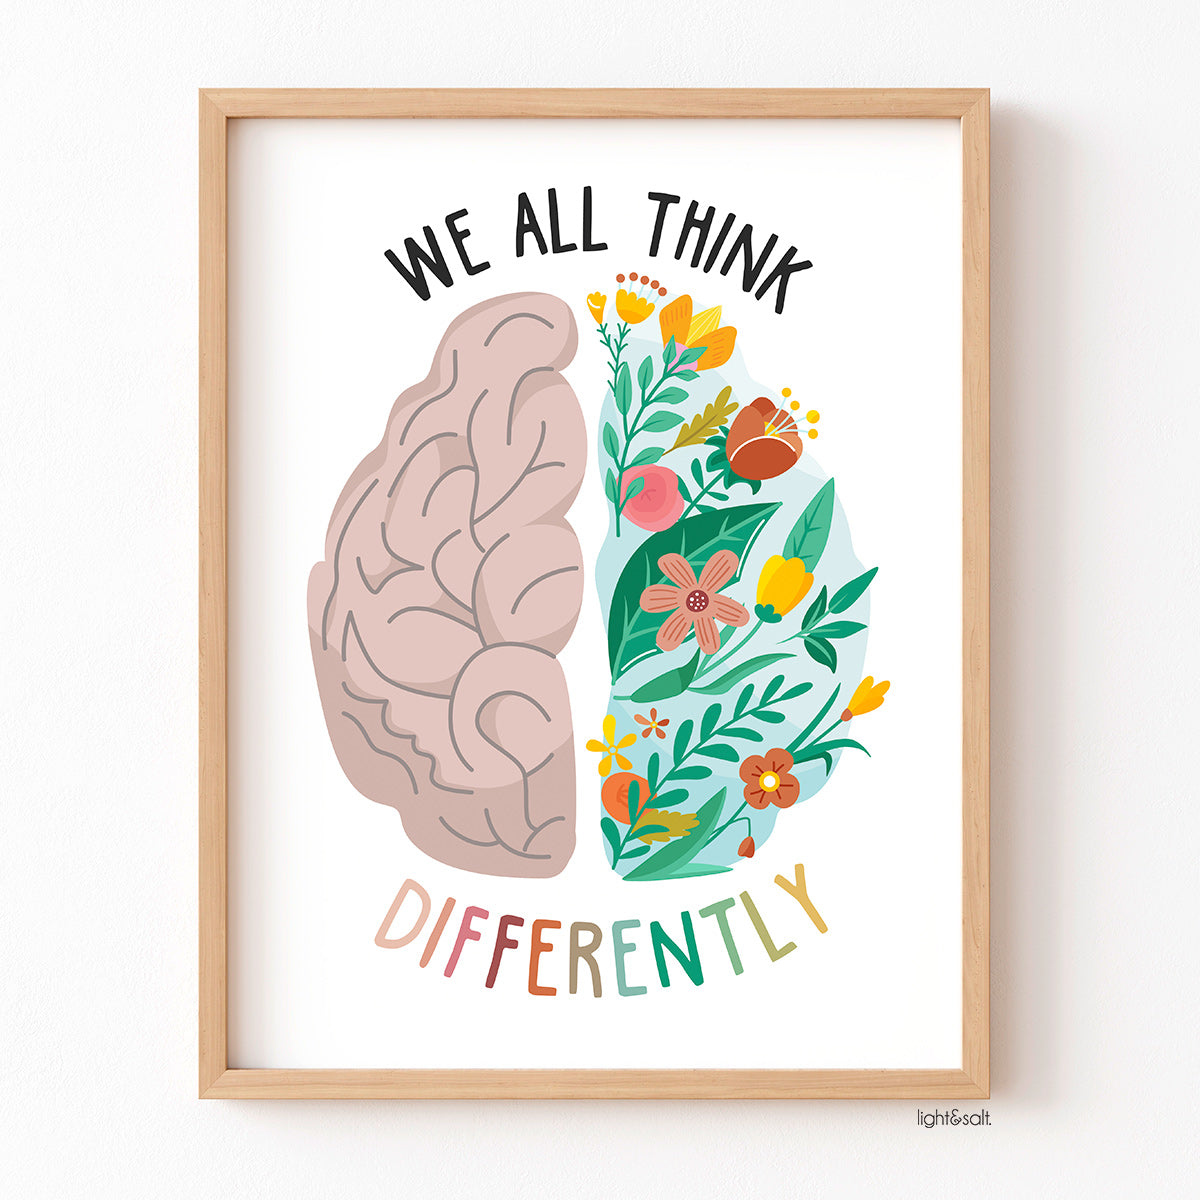 We all think differently poster